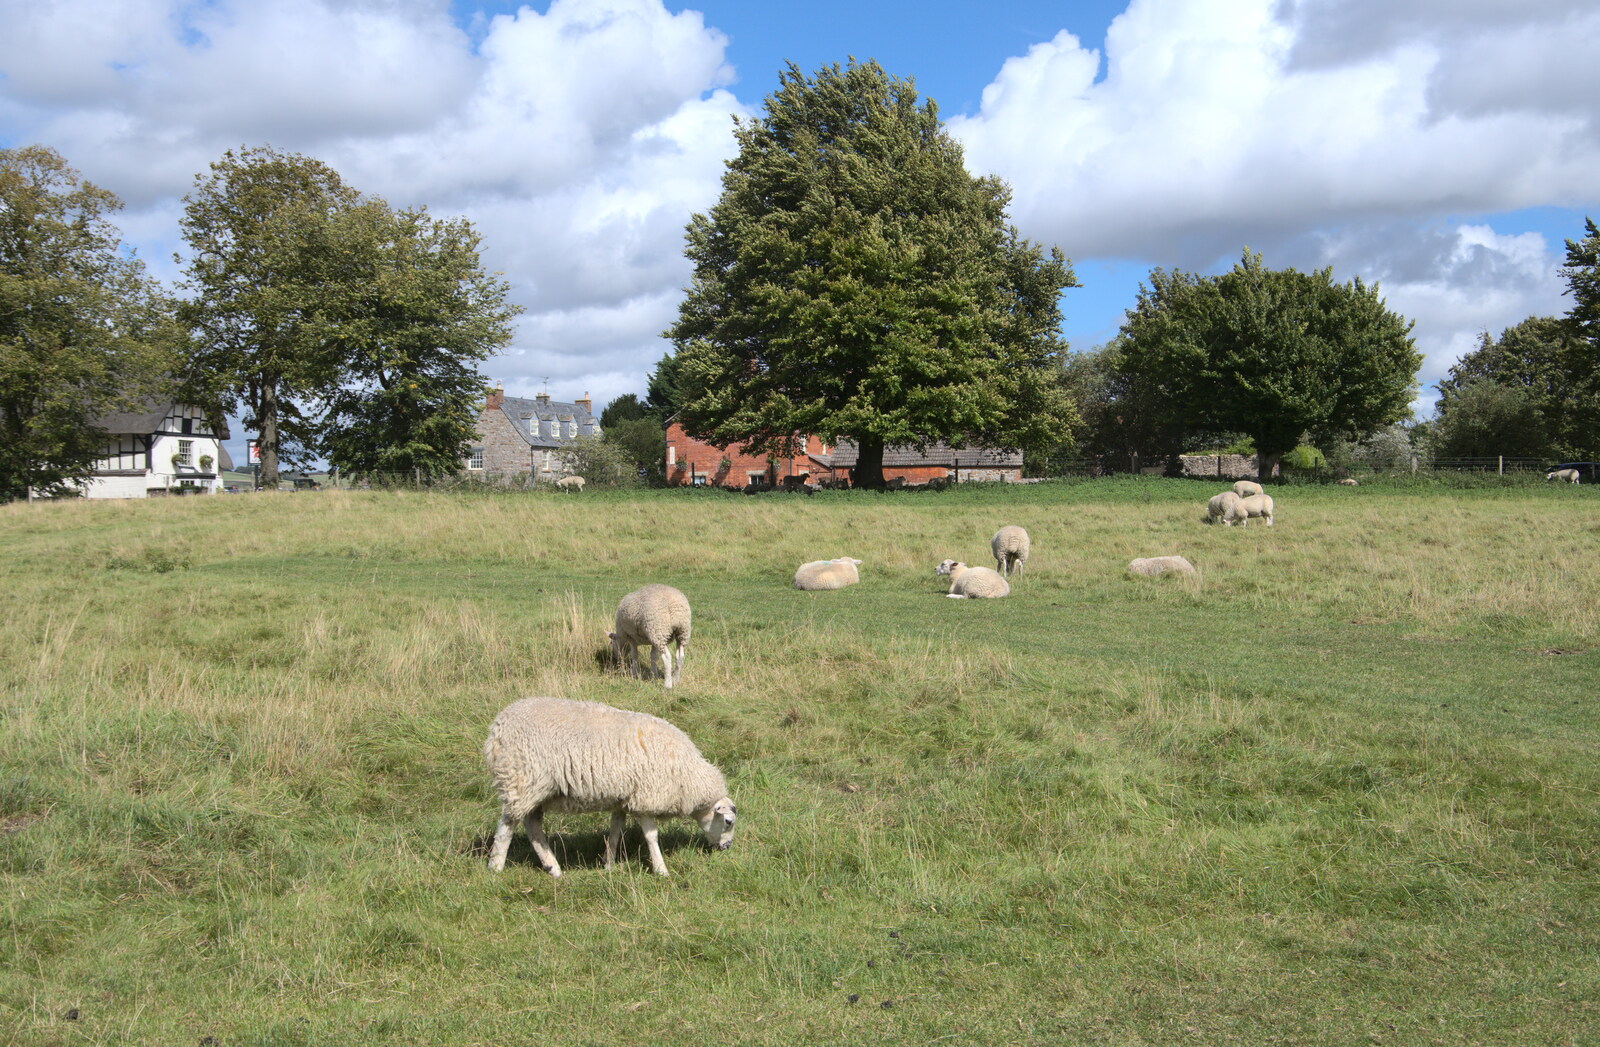 Sheep graze within the circle from Stone Circles: Stonehenge and Avebury, Wiltshire - 22nd August 2020